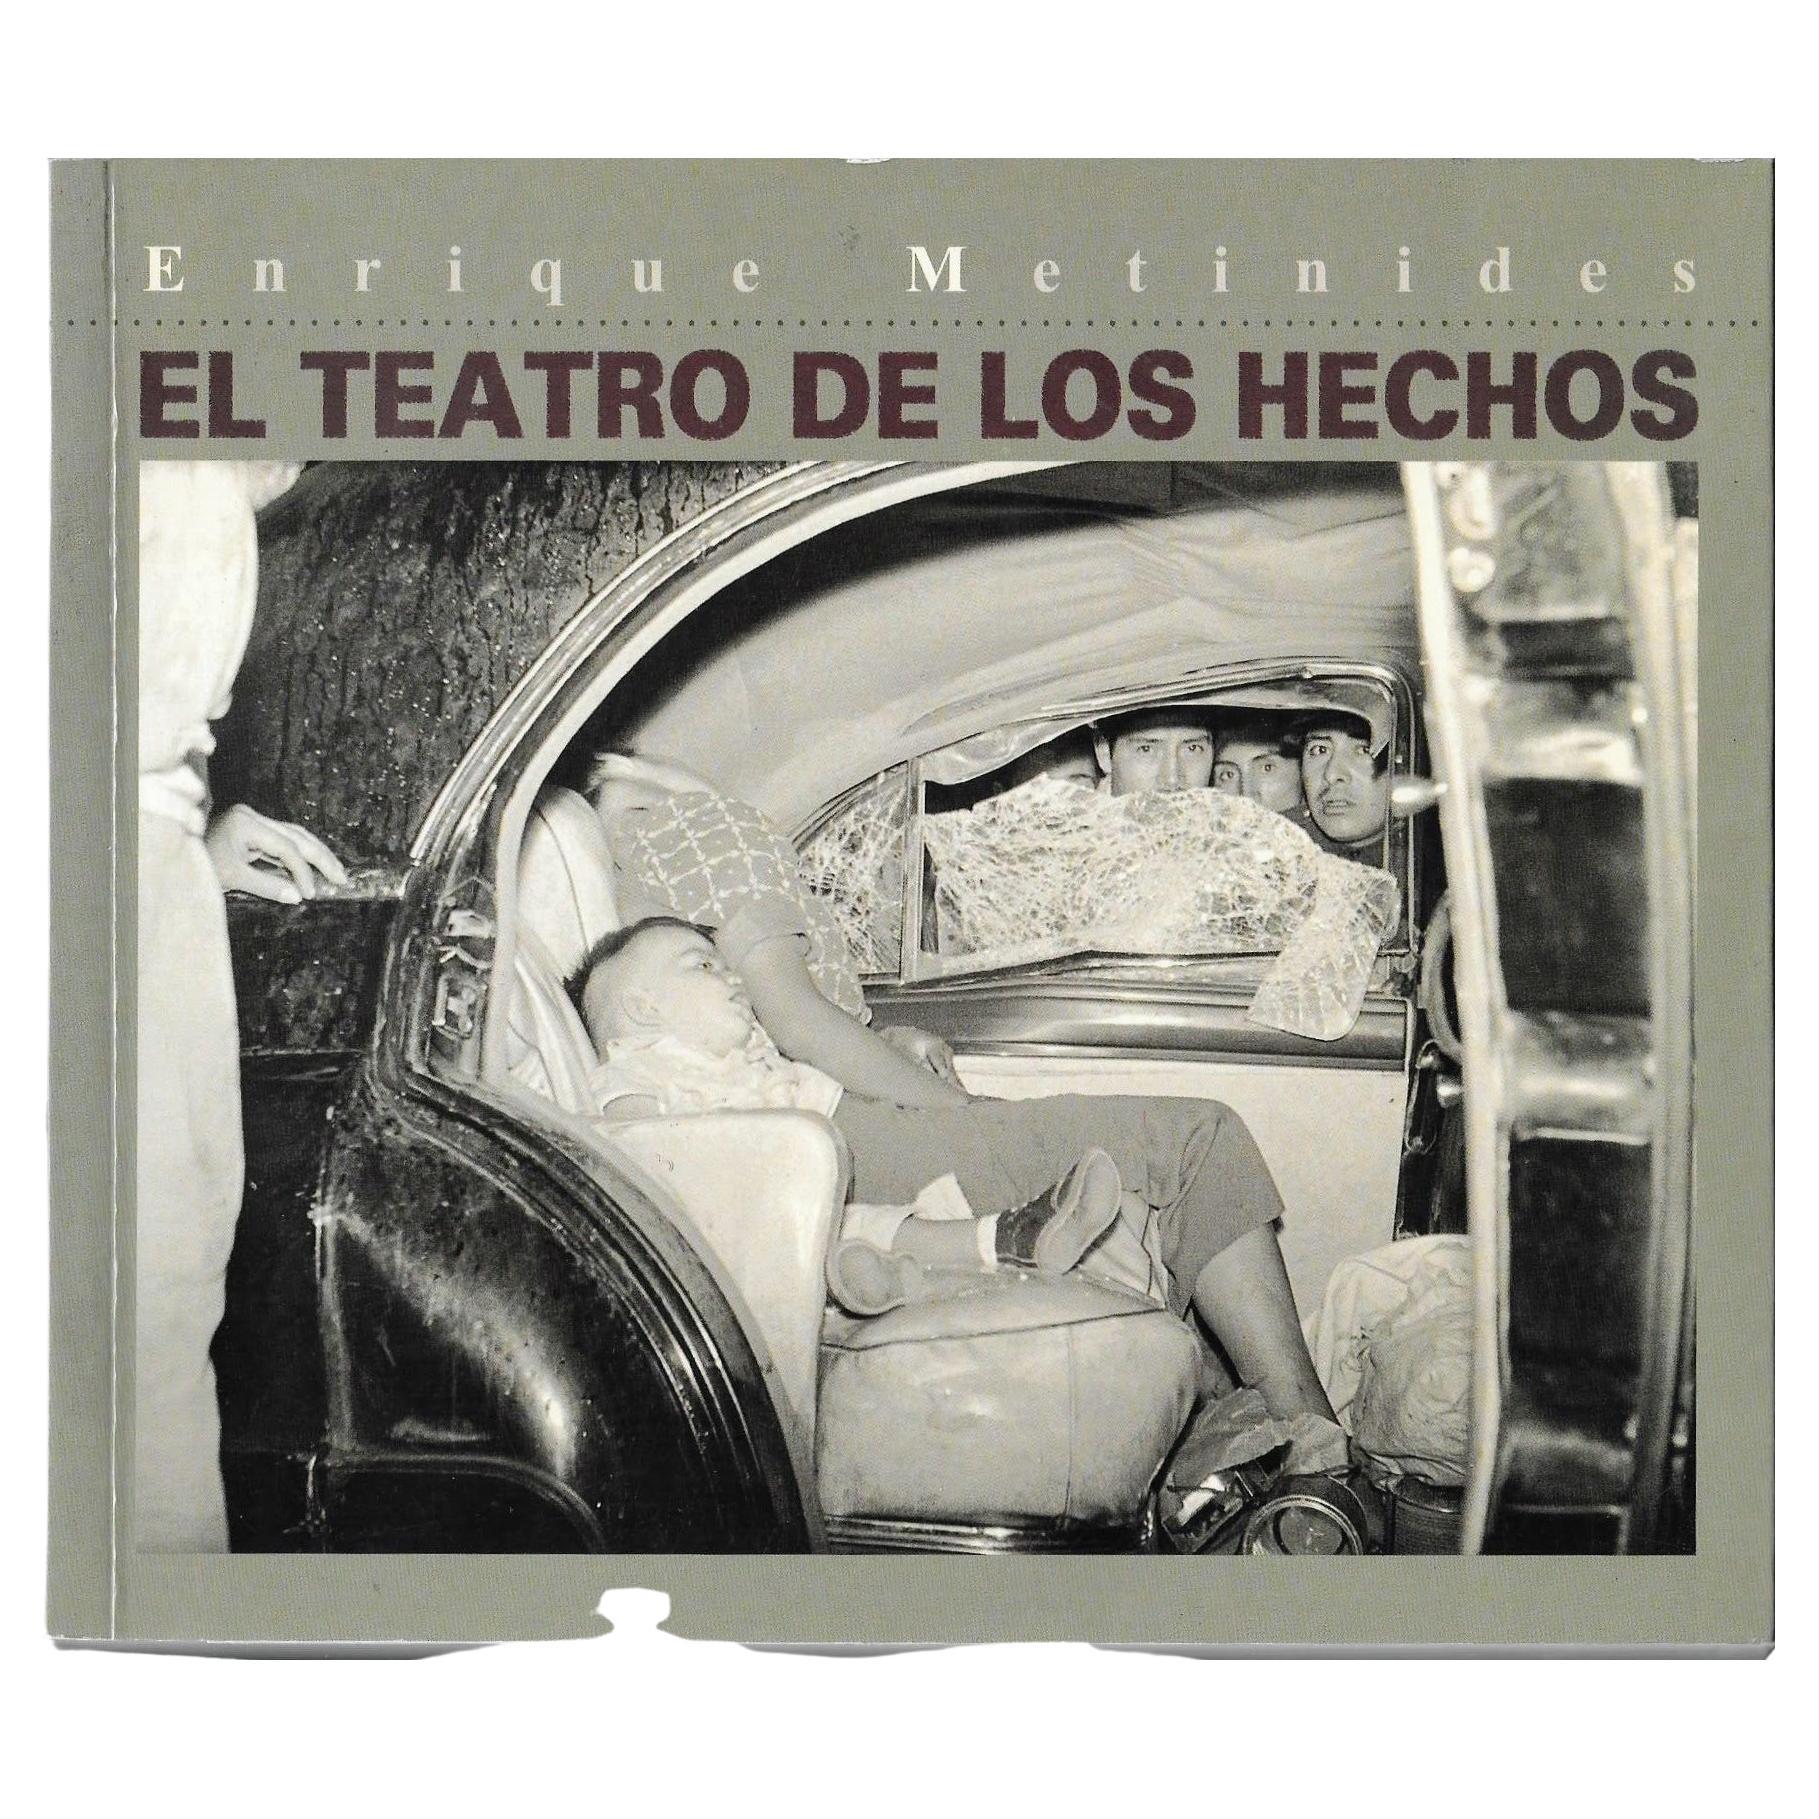 Amazing Book of the work of Enrique Metinides, master of Tabloid Photojournalism For Sale